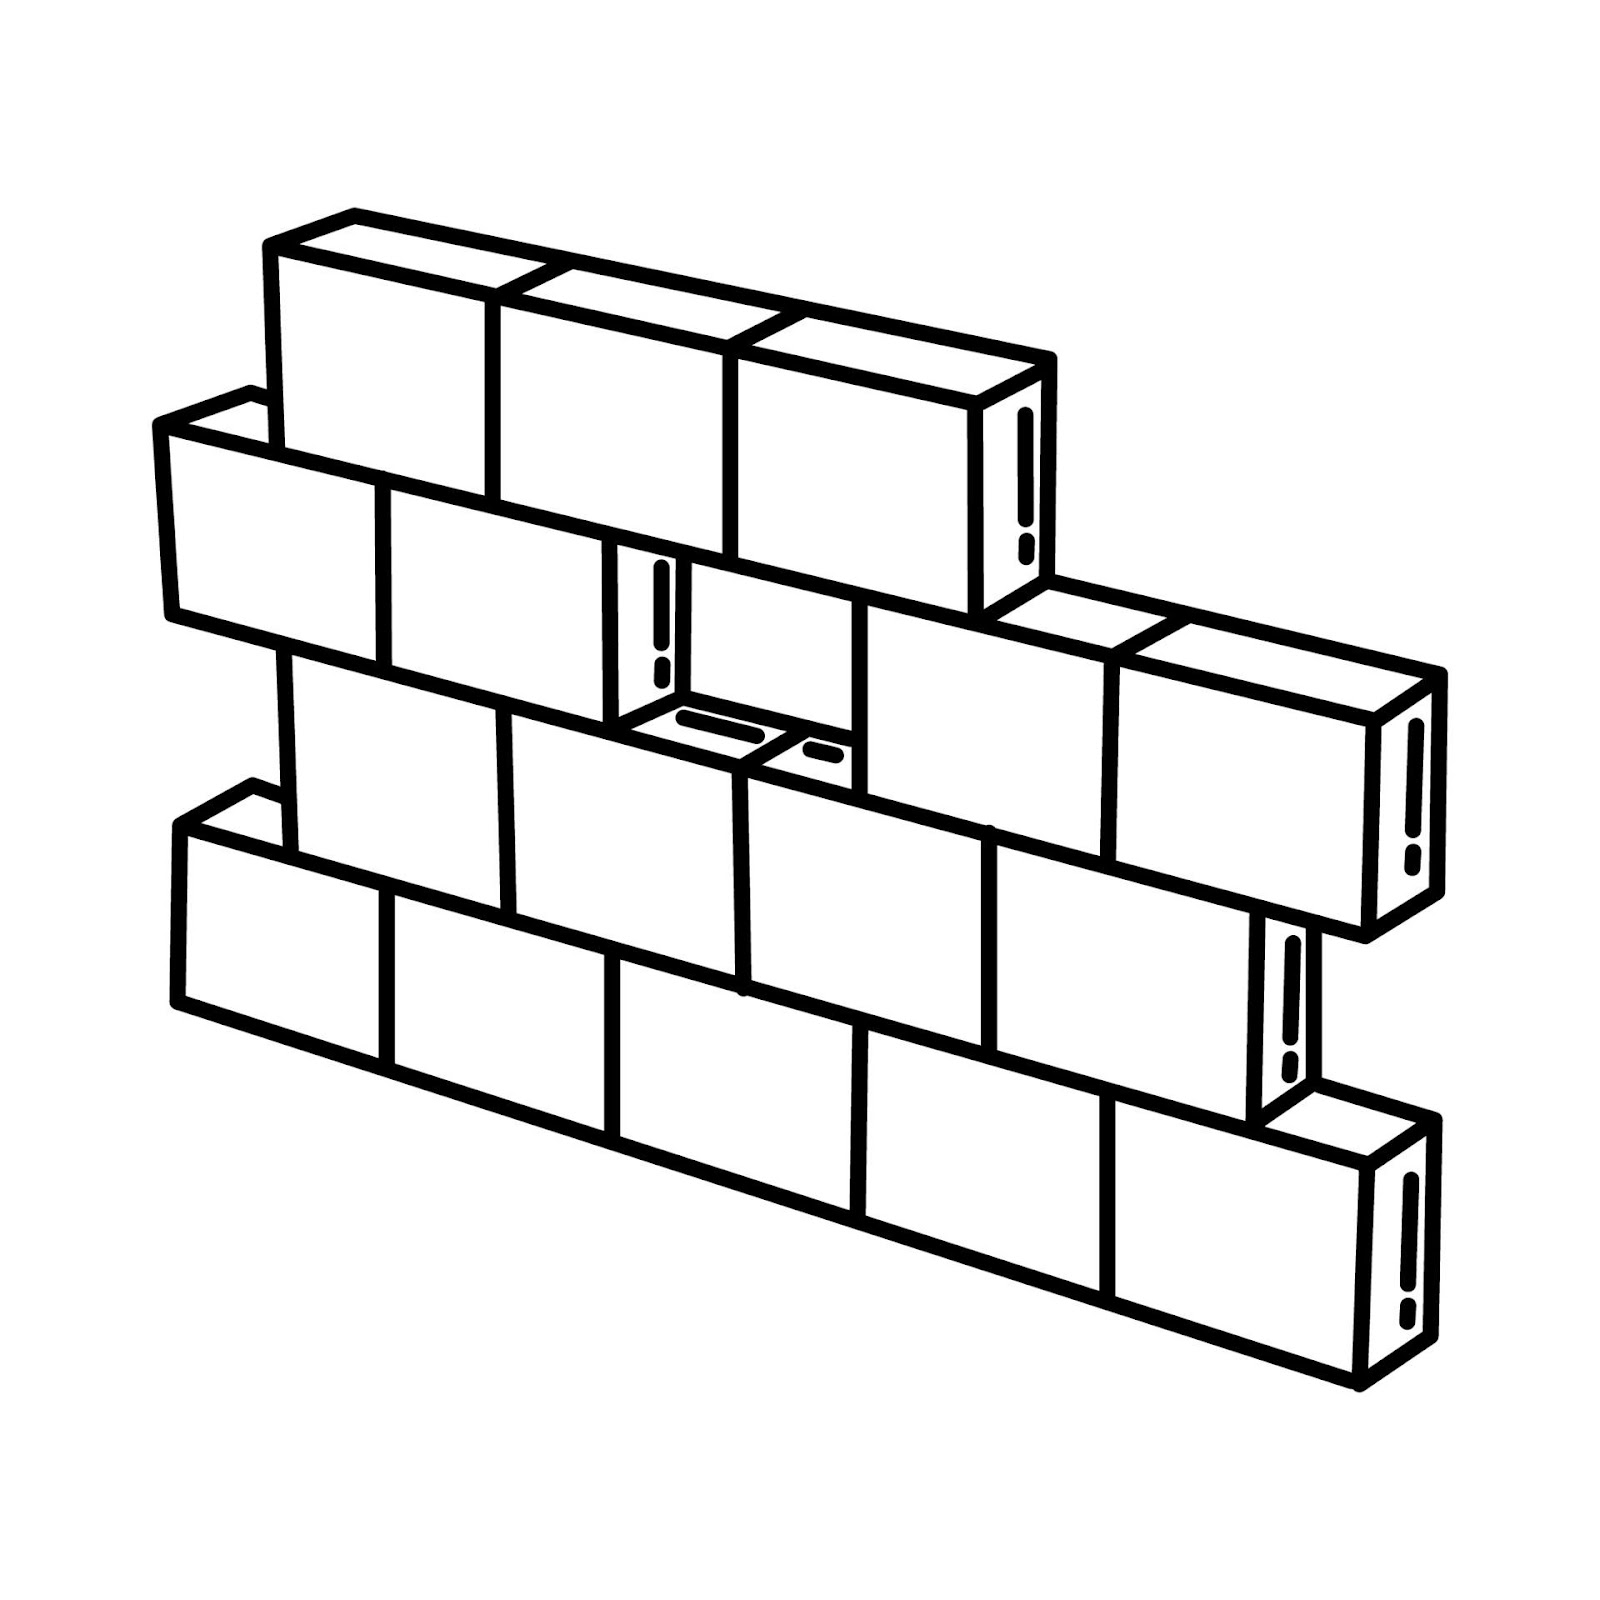 cement-blocks-icon-doodle-hand-drawn-or-outline-icon-style-vector.jpg